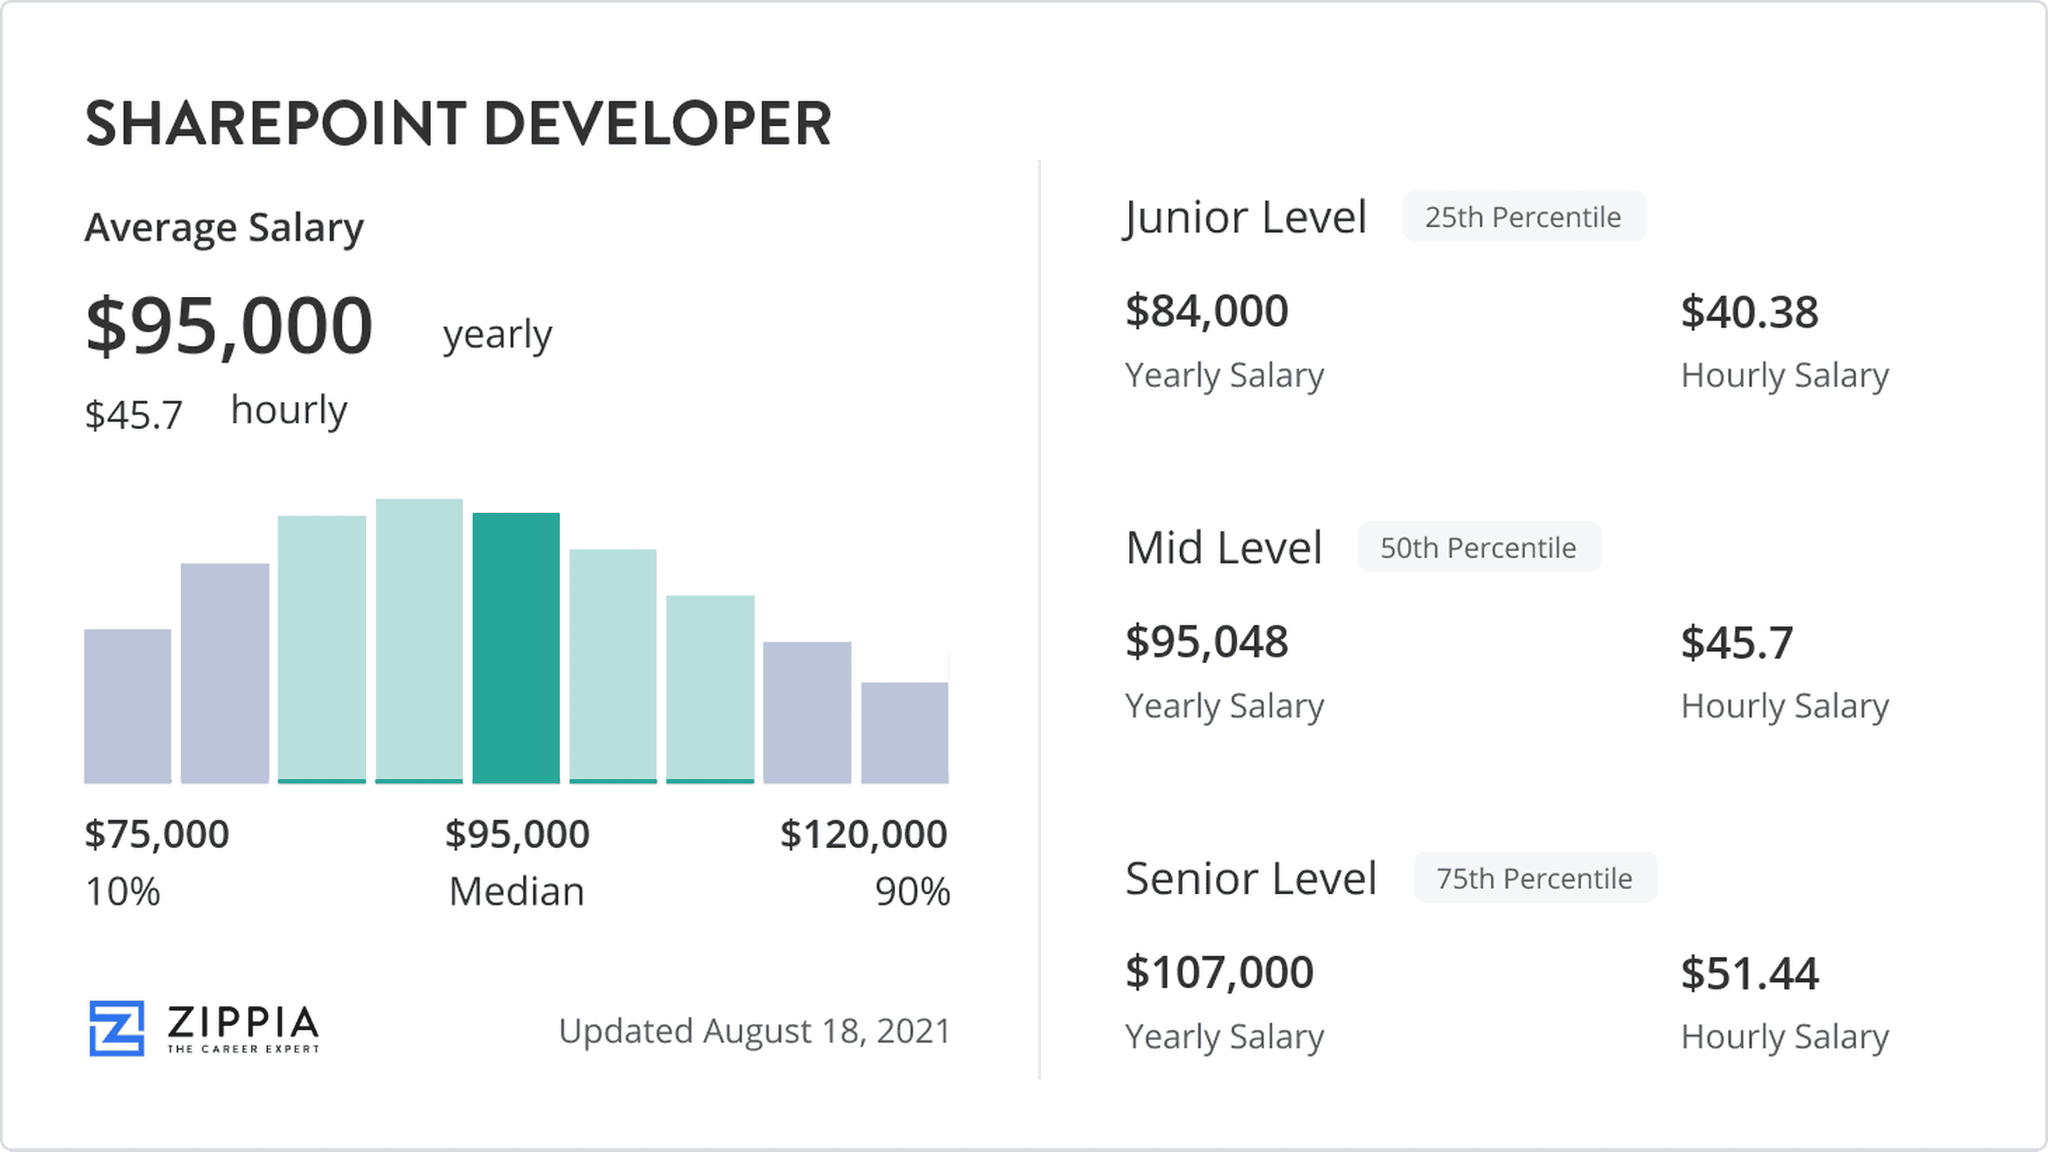 How Much Do Sharepoint Developers Make?